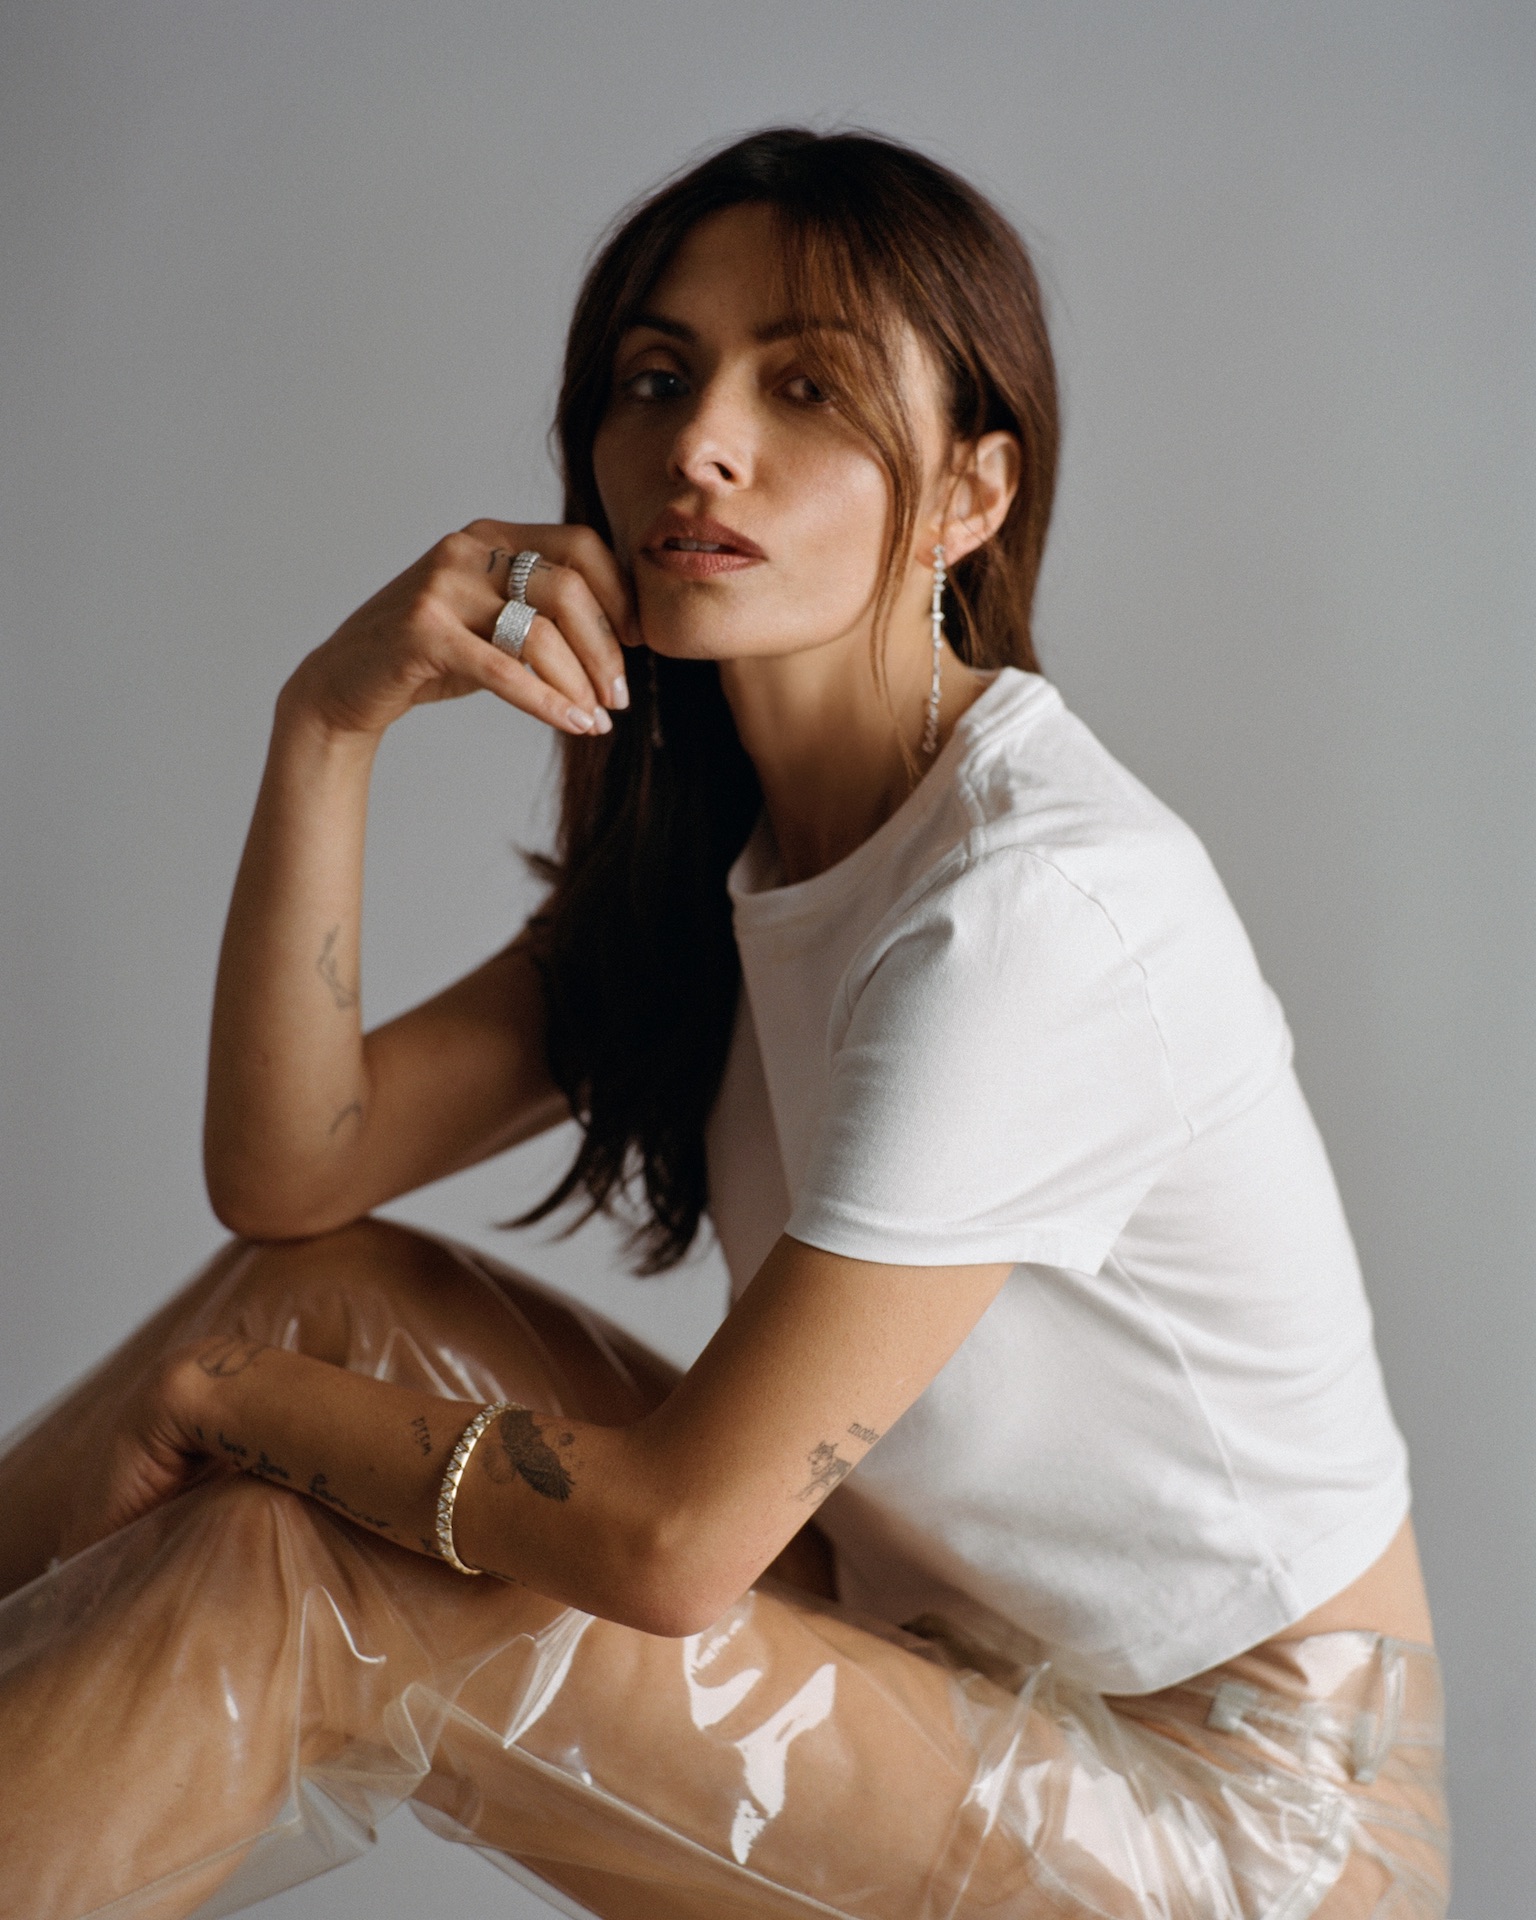 When it comes to her career ambitions and natural diamonds, Sarah Shahi is going big or going home.